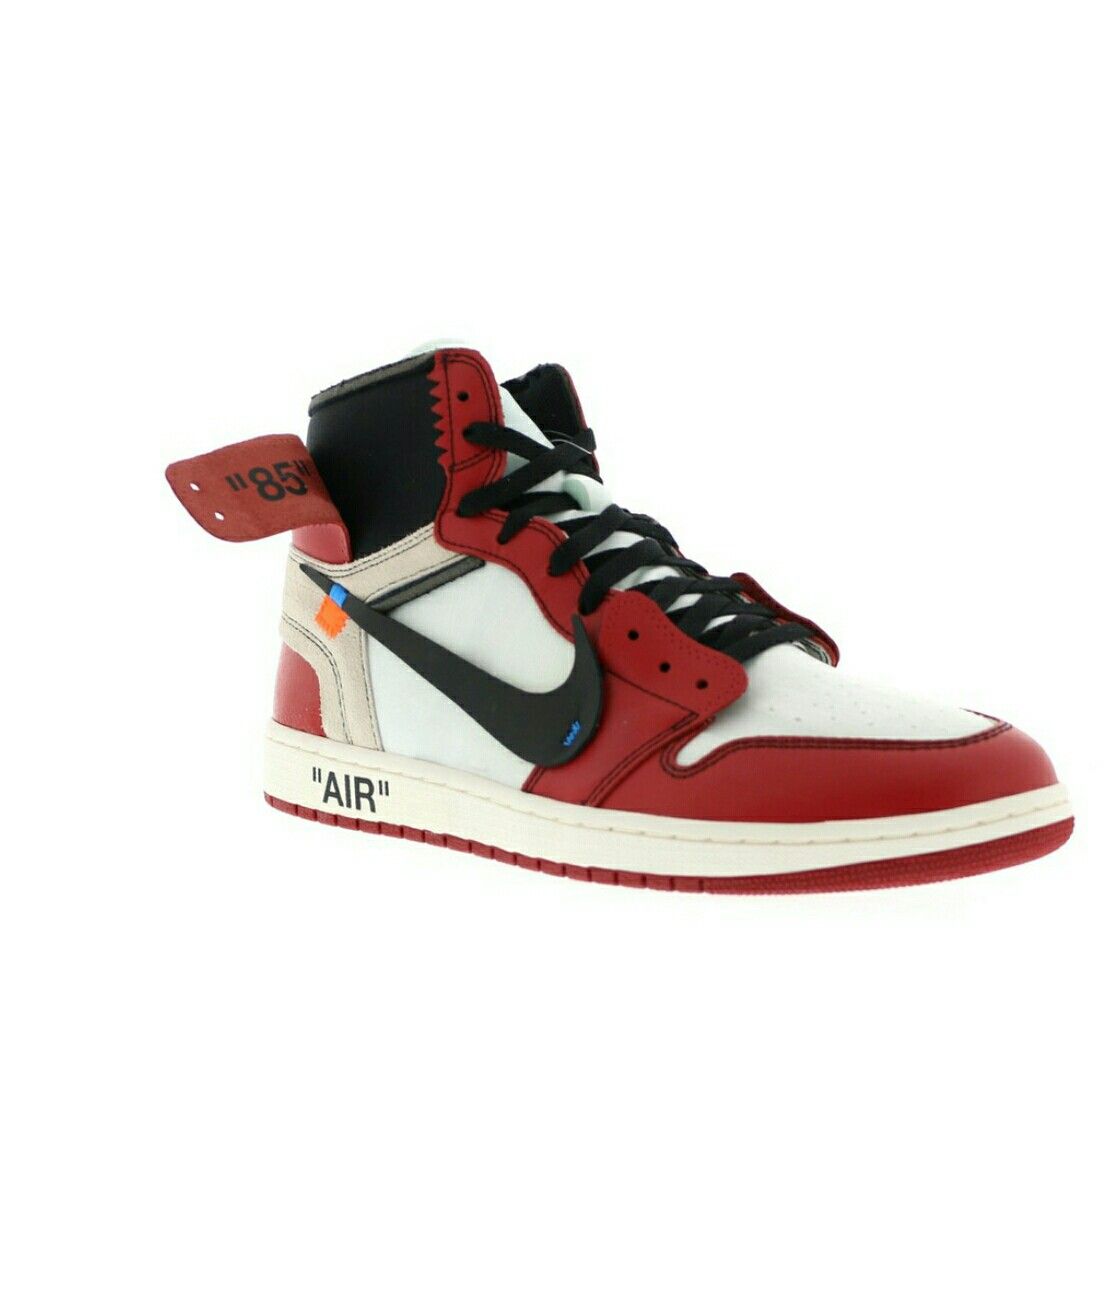 Off-White X Jordan Chicago 1's Size 11 for Sale in Newport Beach, CA ...